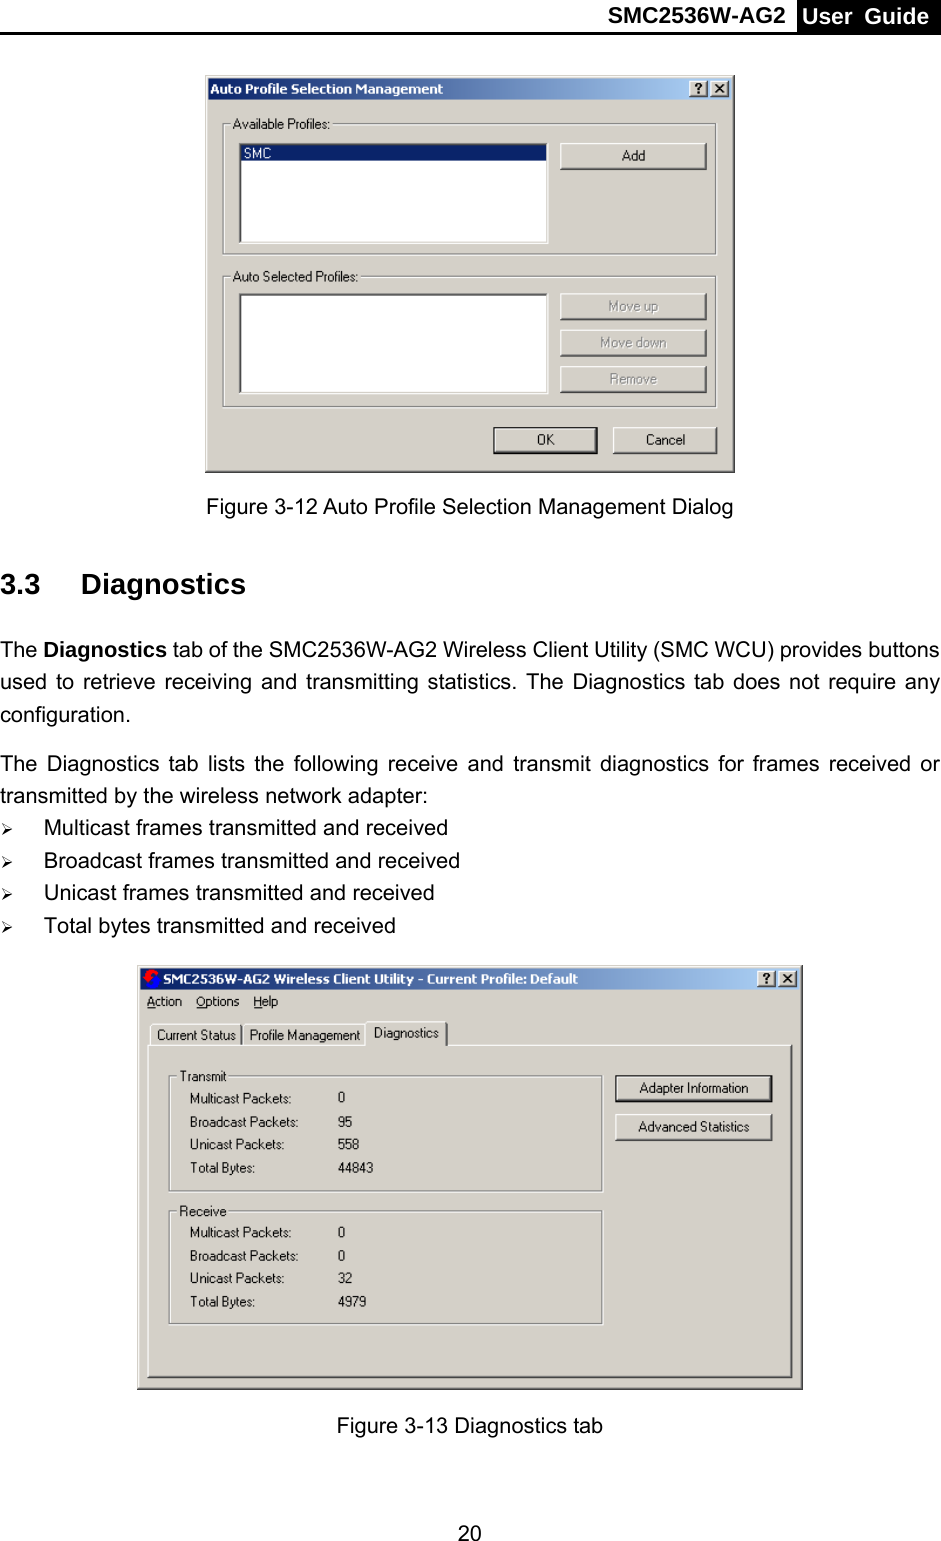 SMC2536W-AG2  User Guide   20 Figure 3-12 Auto Profile Selection Management Dialog 3.3  Diagnostics The Diagnostics tab of the SMC2536W-AG2 Wireless Client Utility (SMC WCU) provides buttons used to retrieve receiving and transmitting statistics. The Diagnostics tab does not require any configuration.   The Diagnostics tab lists the following receive and transmit diagnostics for frames received or transmitted by the wireless network adapter: ¾ Multicast frames transmitted and received   ¾ Broadcast frames transmitted and received   ¾ Unicast frames transmitted and received   ¾ Total bytes transmitted and received  Figure 3-13 Diagnostics tab 